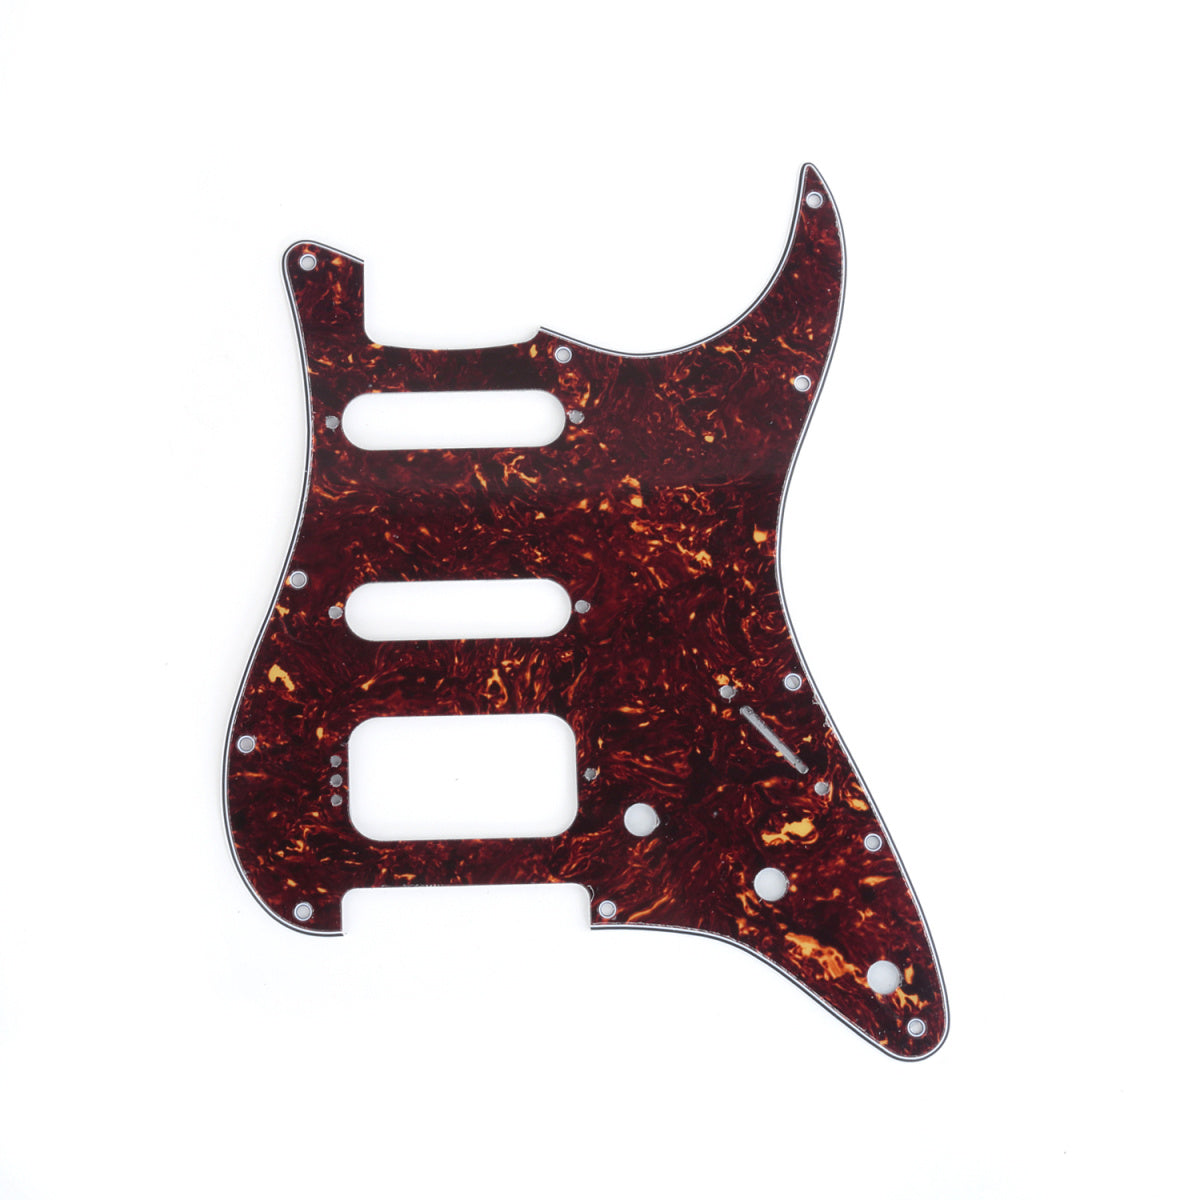 Musiclily Pro 11-Hole Round Corner HSS Guitar Strat Pickguard for USA/Mexican Stratocaster 4-screw Humbucking Mounting Open Pickup, 4Ply Tortoise Shell